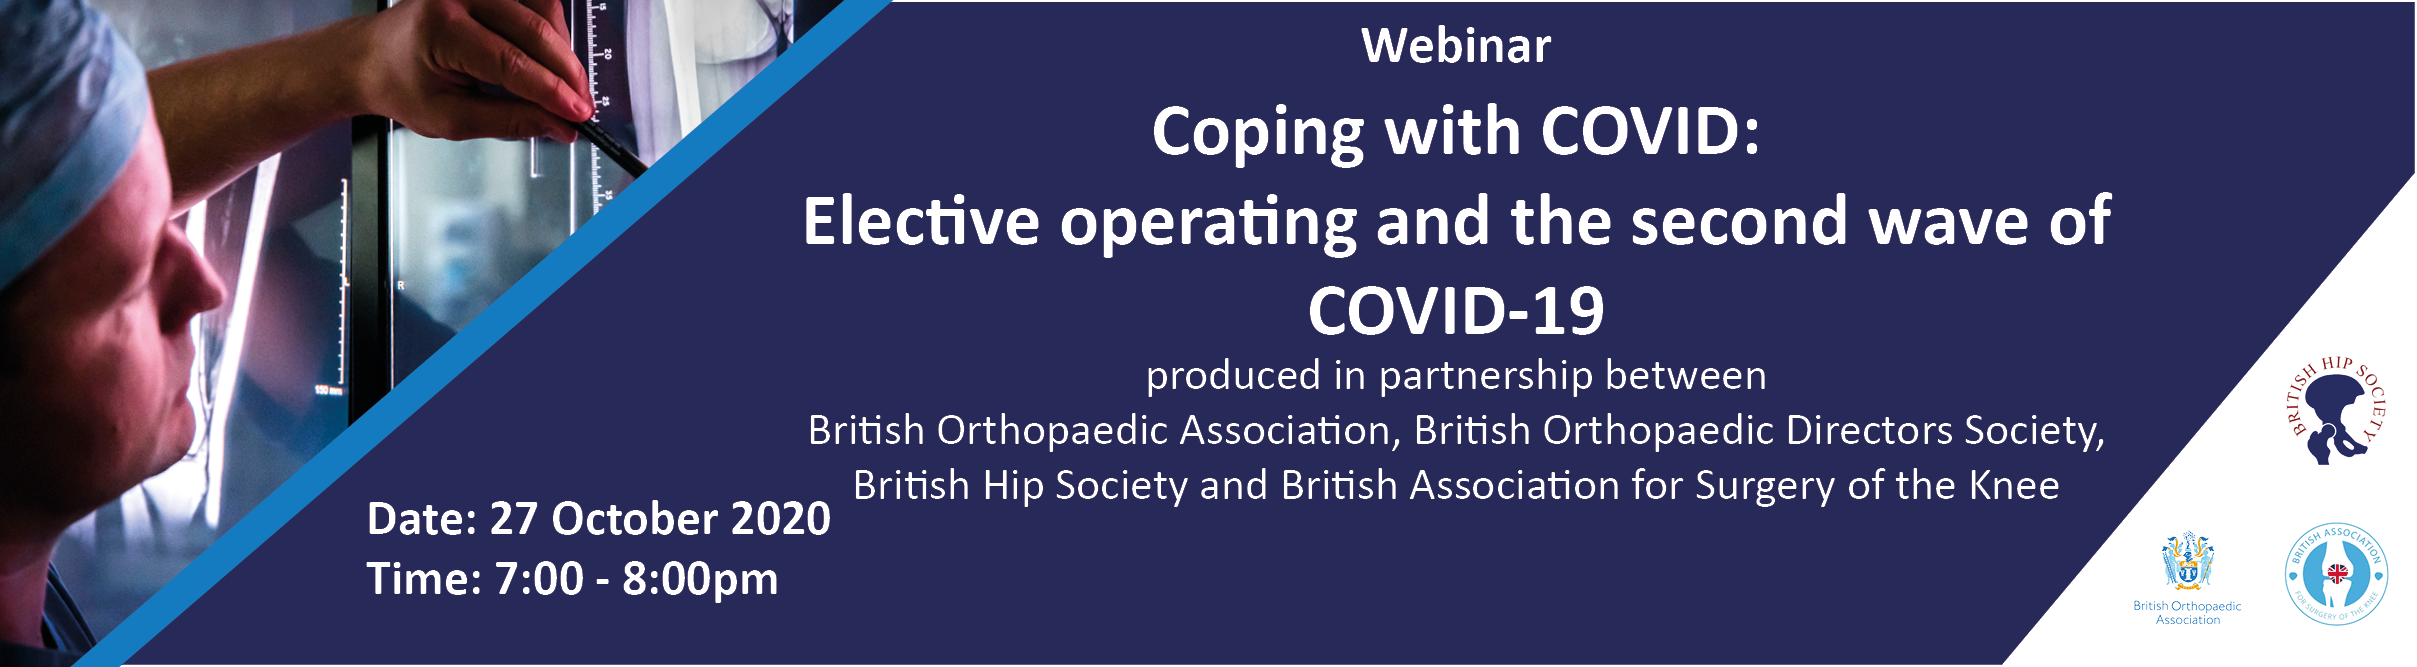 Webinar Coping with COVID.png